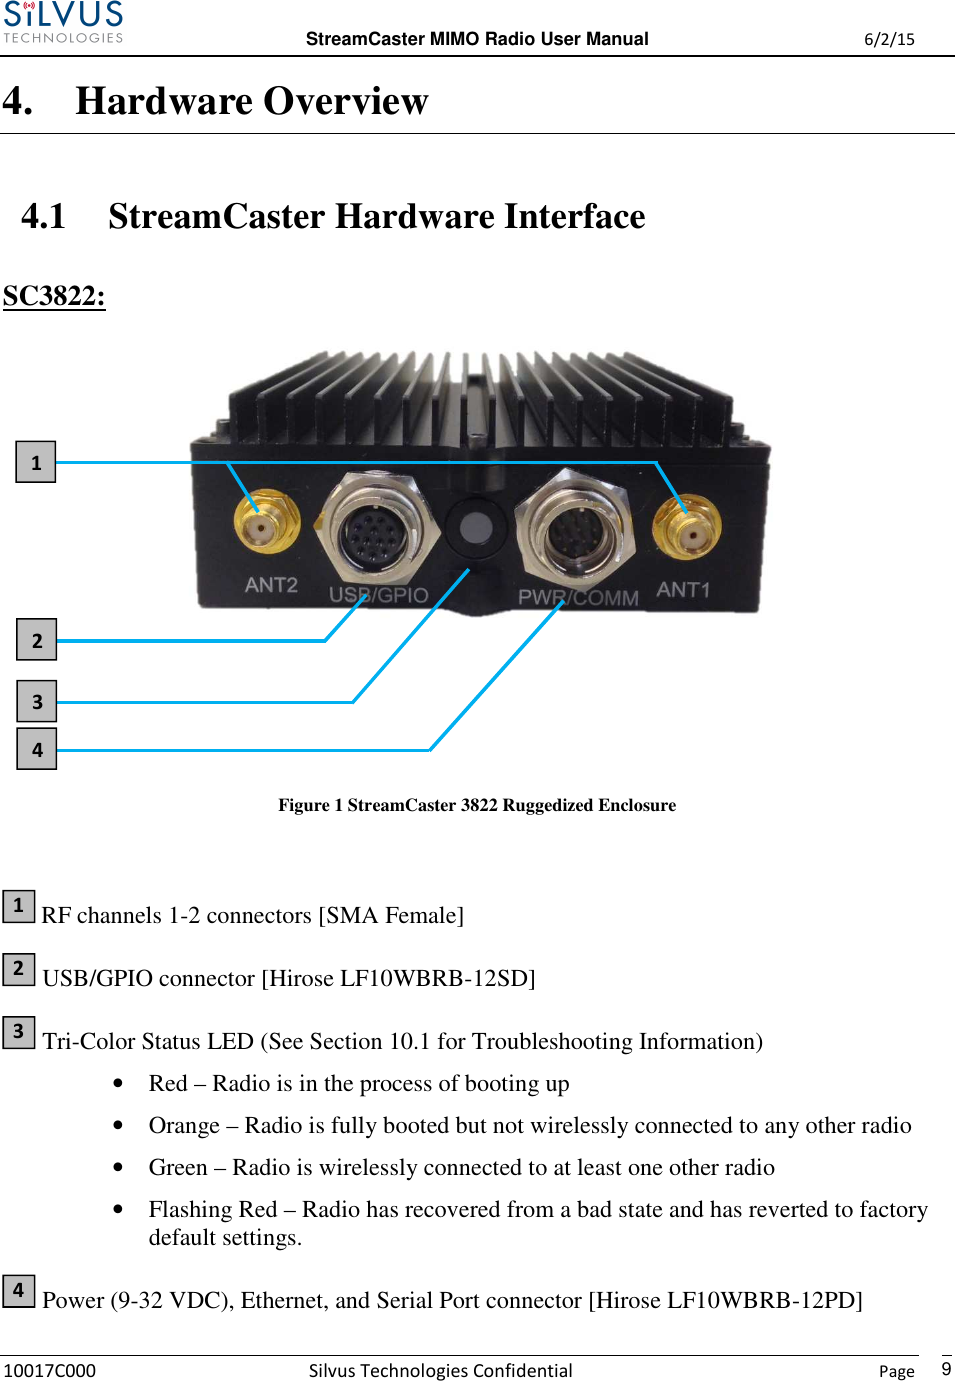  StreamCaster MIMO Radio User Manual  6/2/15 10017C000 Silvus Technologies Confidential    Page   94. Hardware Overview 4.1 StreamCaster Hardware Interface SC3822:      Figure 1 StreamCaster 3822 Ruggedized Enclosure   RF channels 1-2 connectors [SMA Female]  USB/GPIO connector [Hirose LF10WBRB-12SD]  Tri-Color Status LED (See Section 10.1 for Troubleshooting Information) • Red – Radio is in the process of booting up • Orange – Radio is fully booted but not wirelessly connected to any other radio • Green – Radio is wirelessly connected to at least one other radio • Flashing Red – Radio has recovered from a bad state and has reverted to factory default settings.  Power (9-32 VDC), Ethernet, and Serial Port connector [Hirose LF10WBRB-12PD] 1 2 3 4 2 1 3 4 